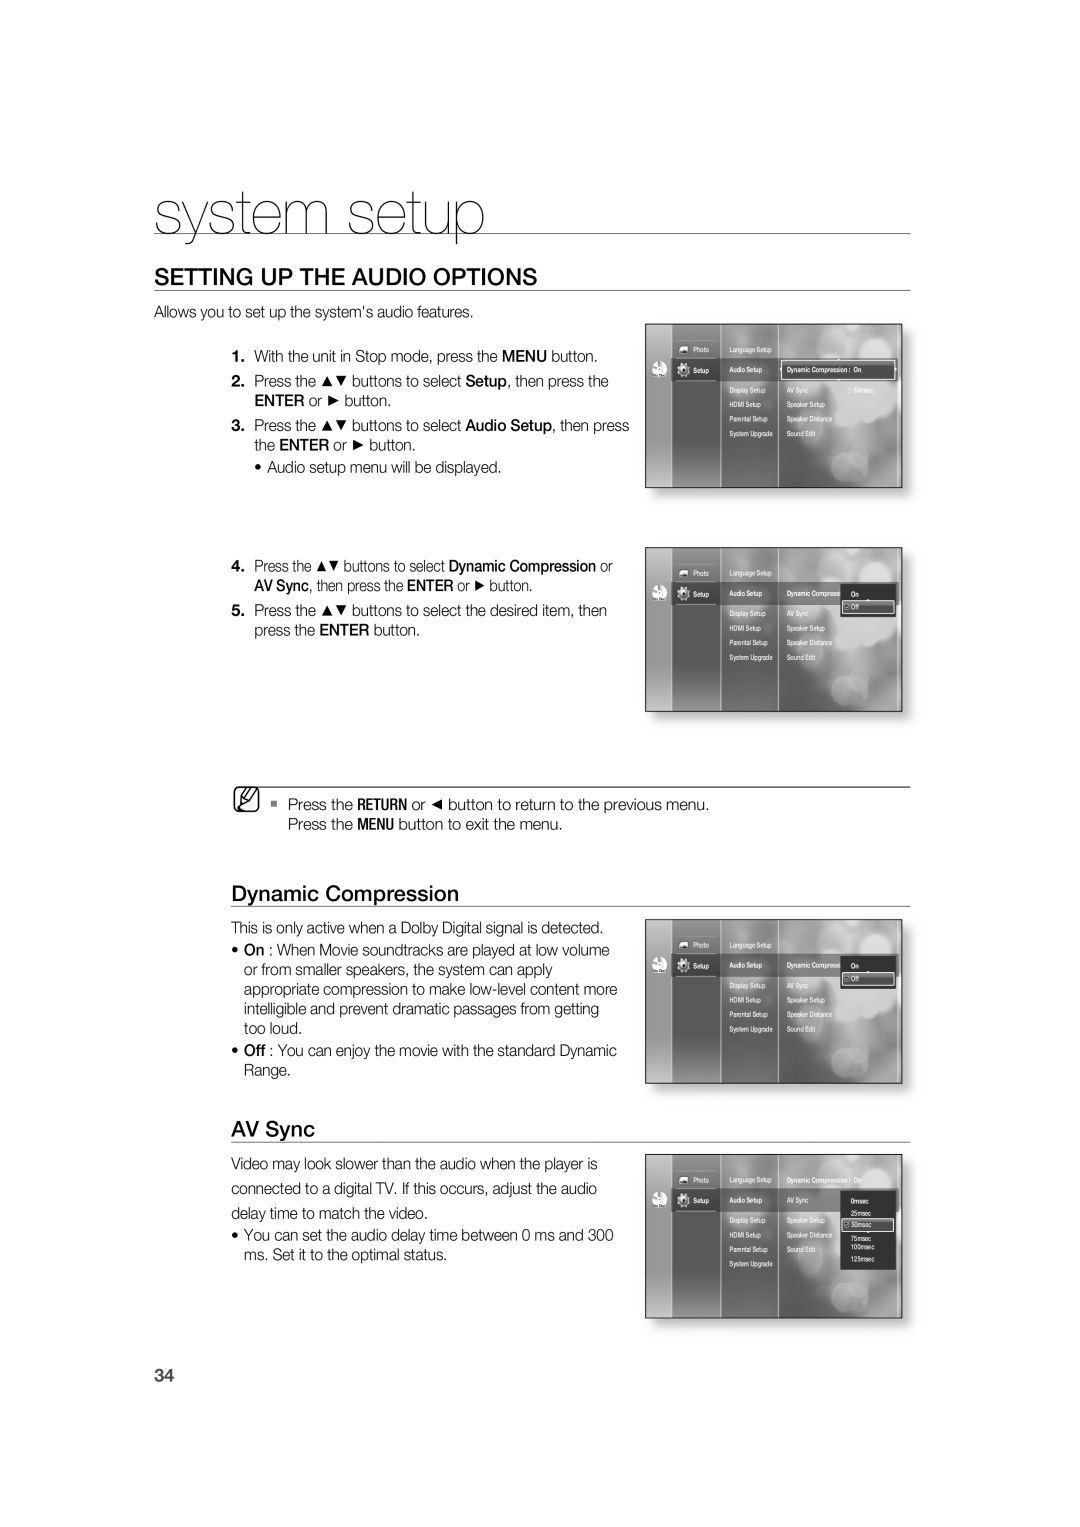 Samsung AH68-02019K manual Setting Up The Audio Options, Dynamic Compression, AV Sync, system setup, ENTER or button 